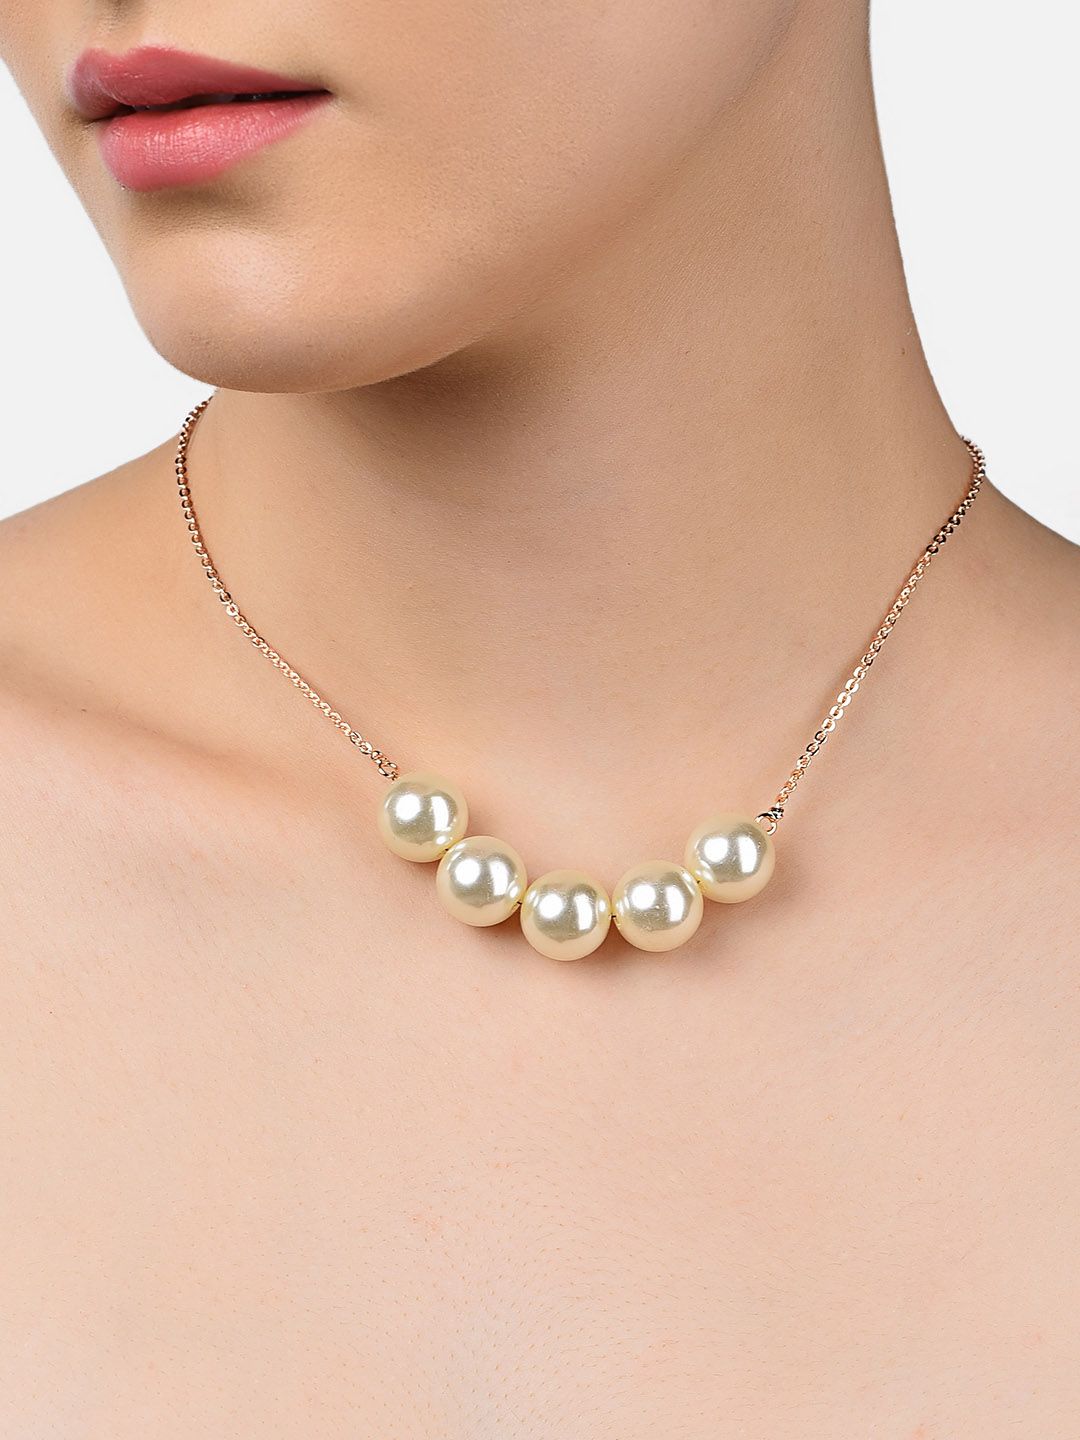 Zaveri Pearls Woman Gold-Toned & White Gold-Plated Necklace Price in India